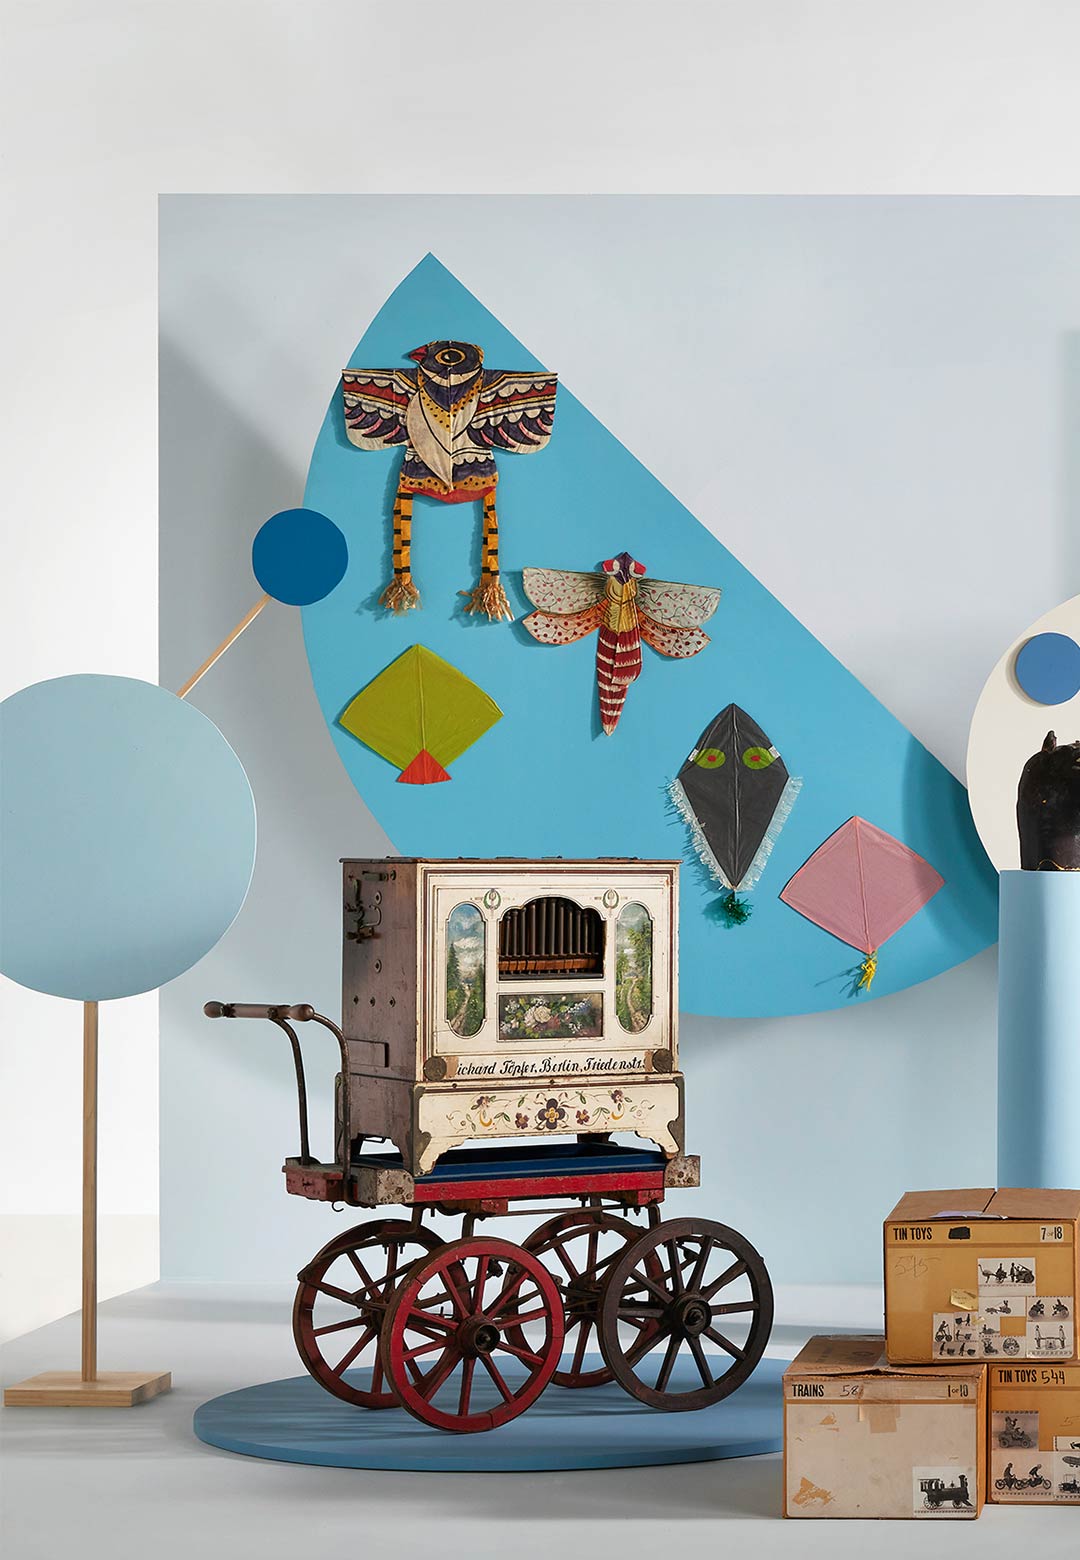 Eames Institute presents toys that inspired Charles and Ray Eames with ‘Toys and Play'